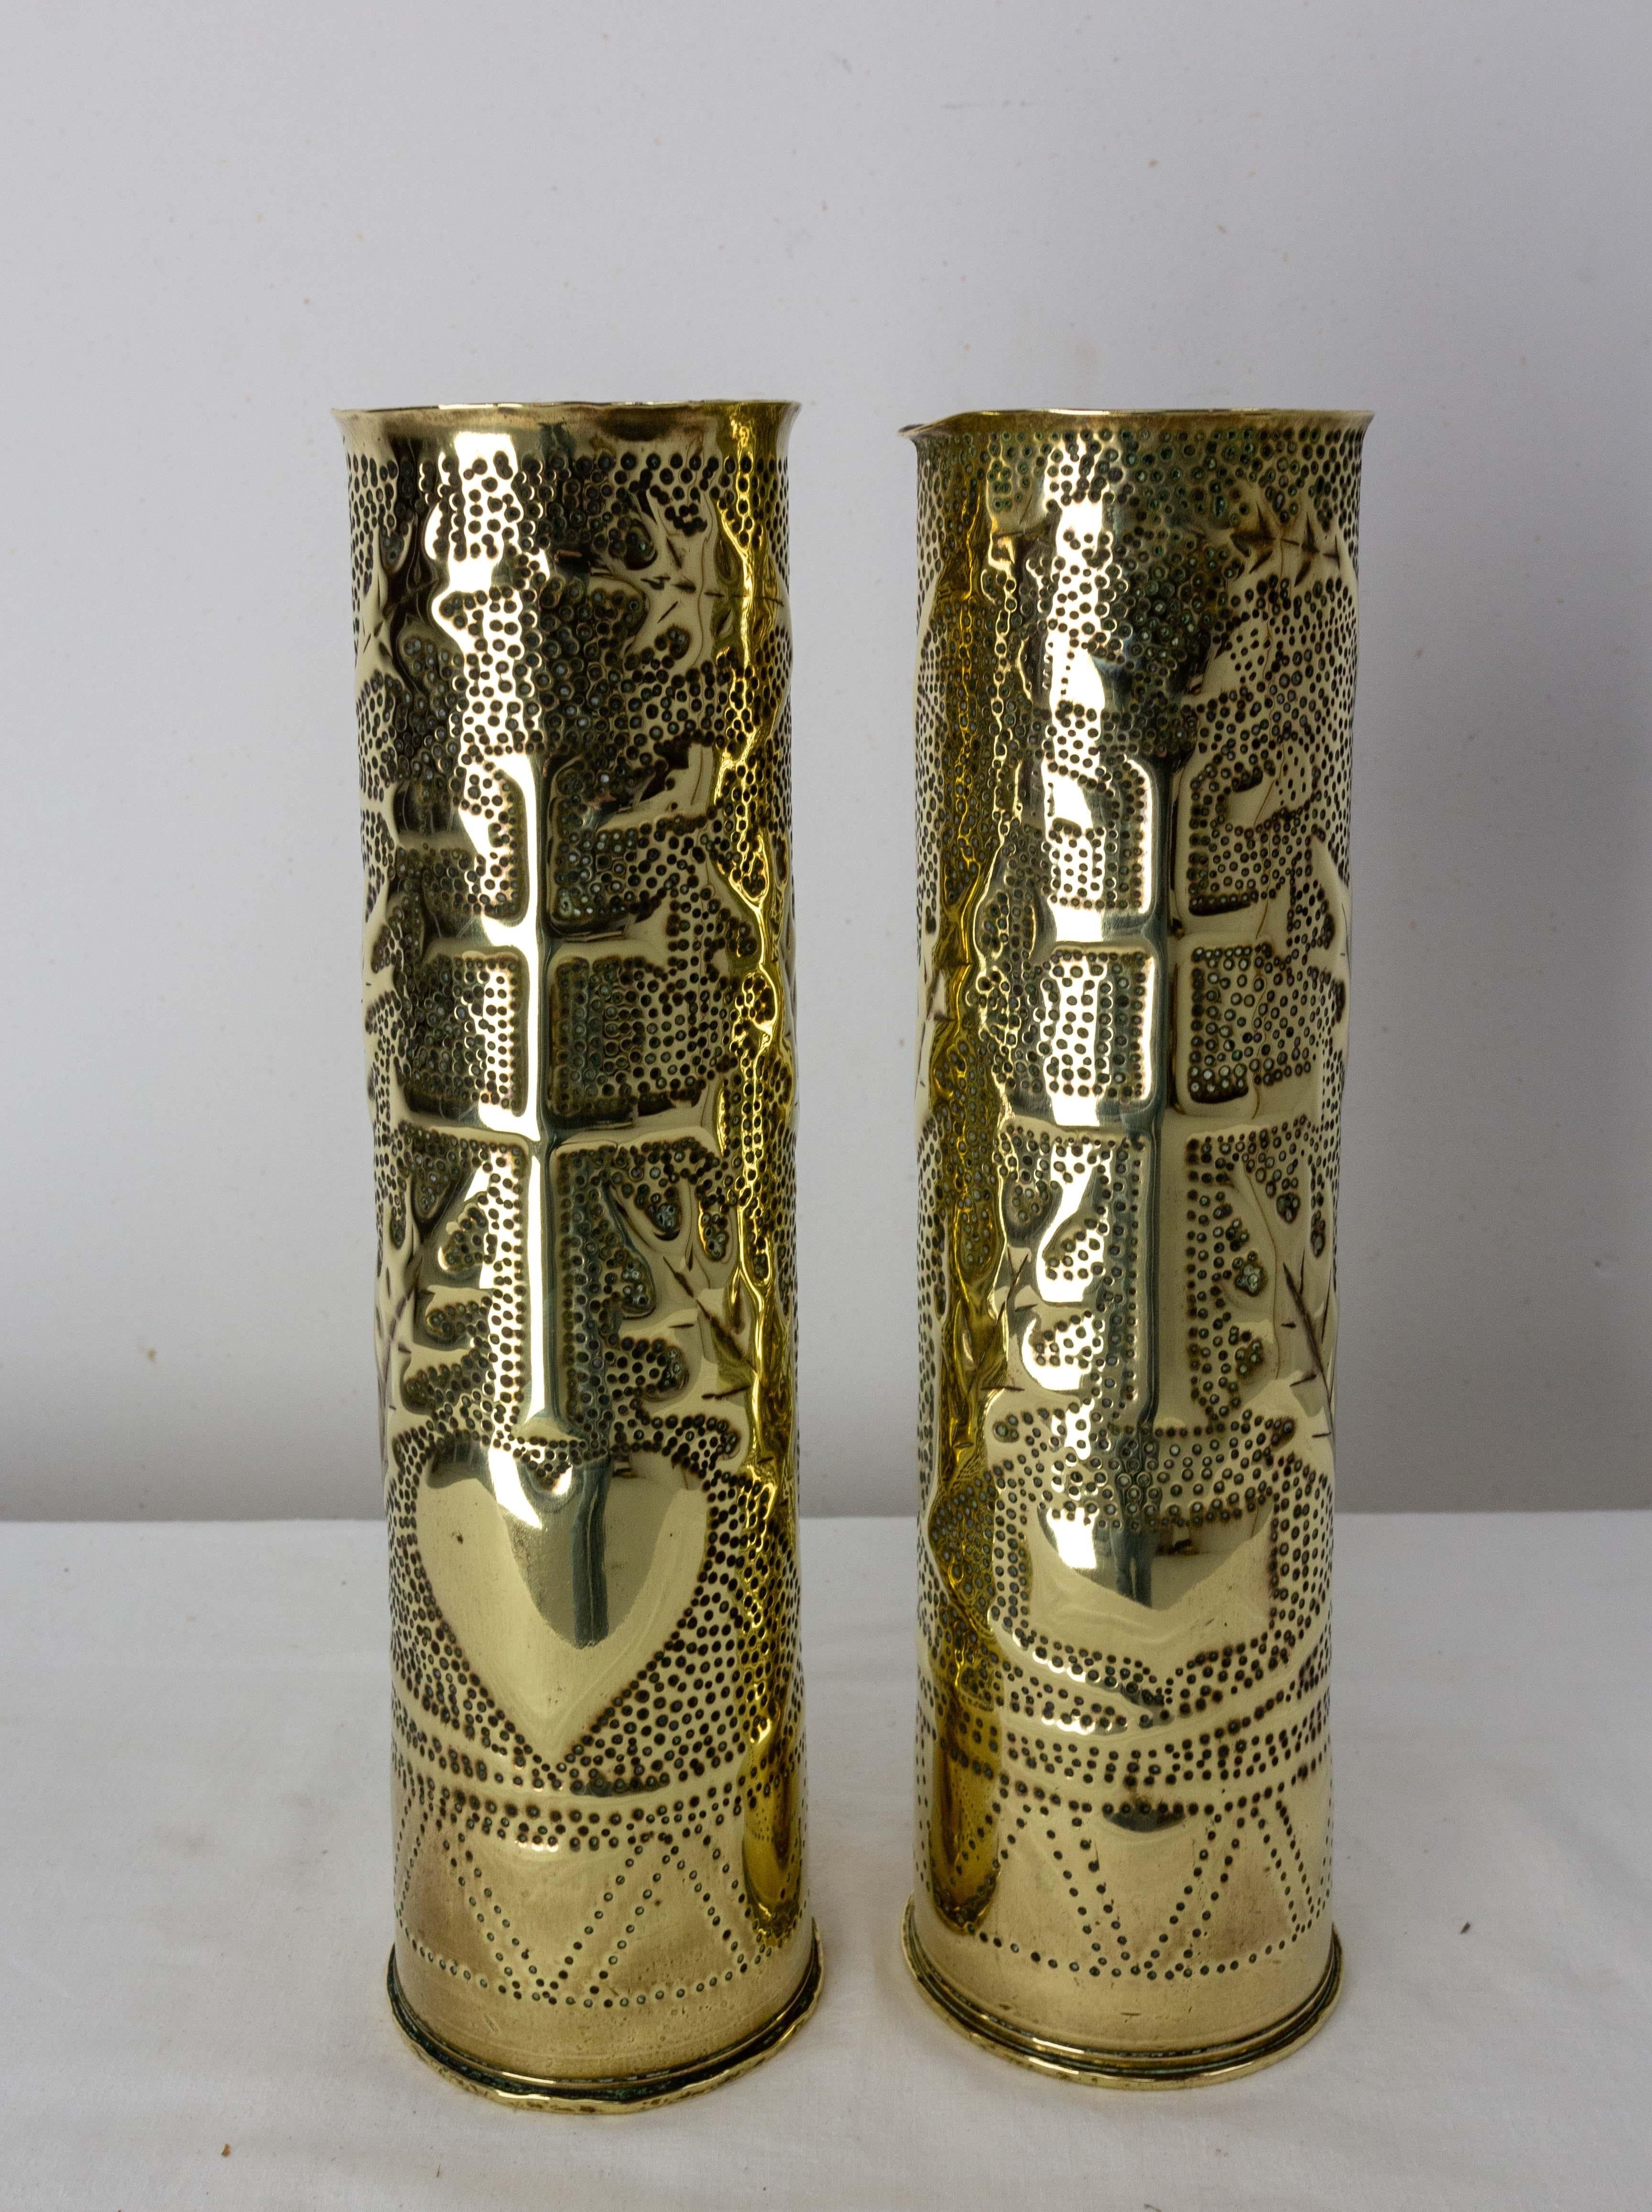 Antique French Pair of Shell Casings from the World War I
Trench Artillery
Brass engraved representing on each casing A Lorraine cross and leaves. On one there is a heart under the Lorraine cross, on the other there is a blazon.
This pair can